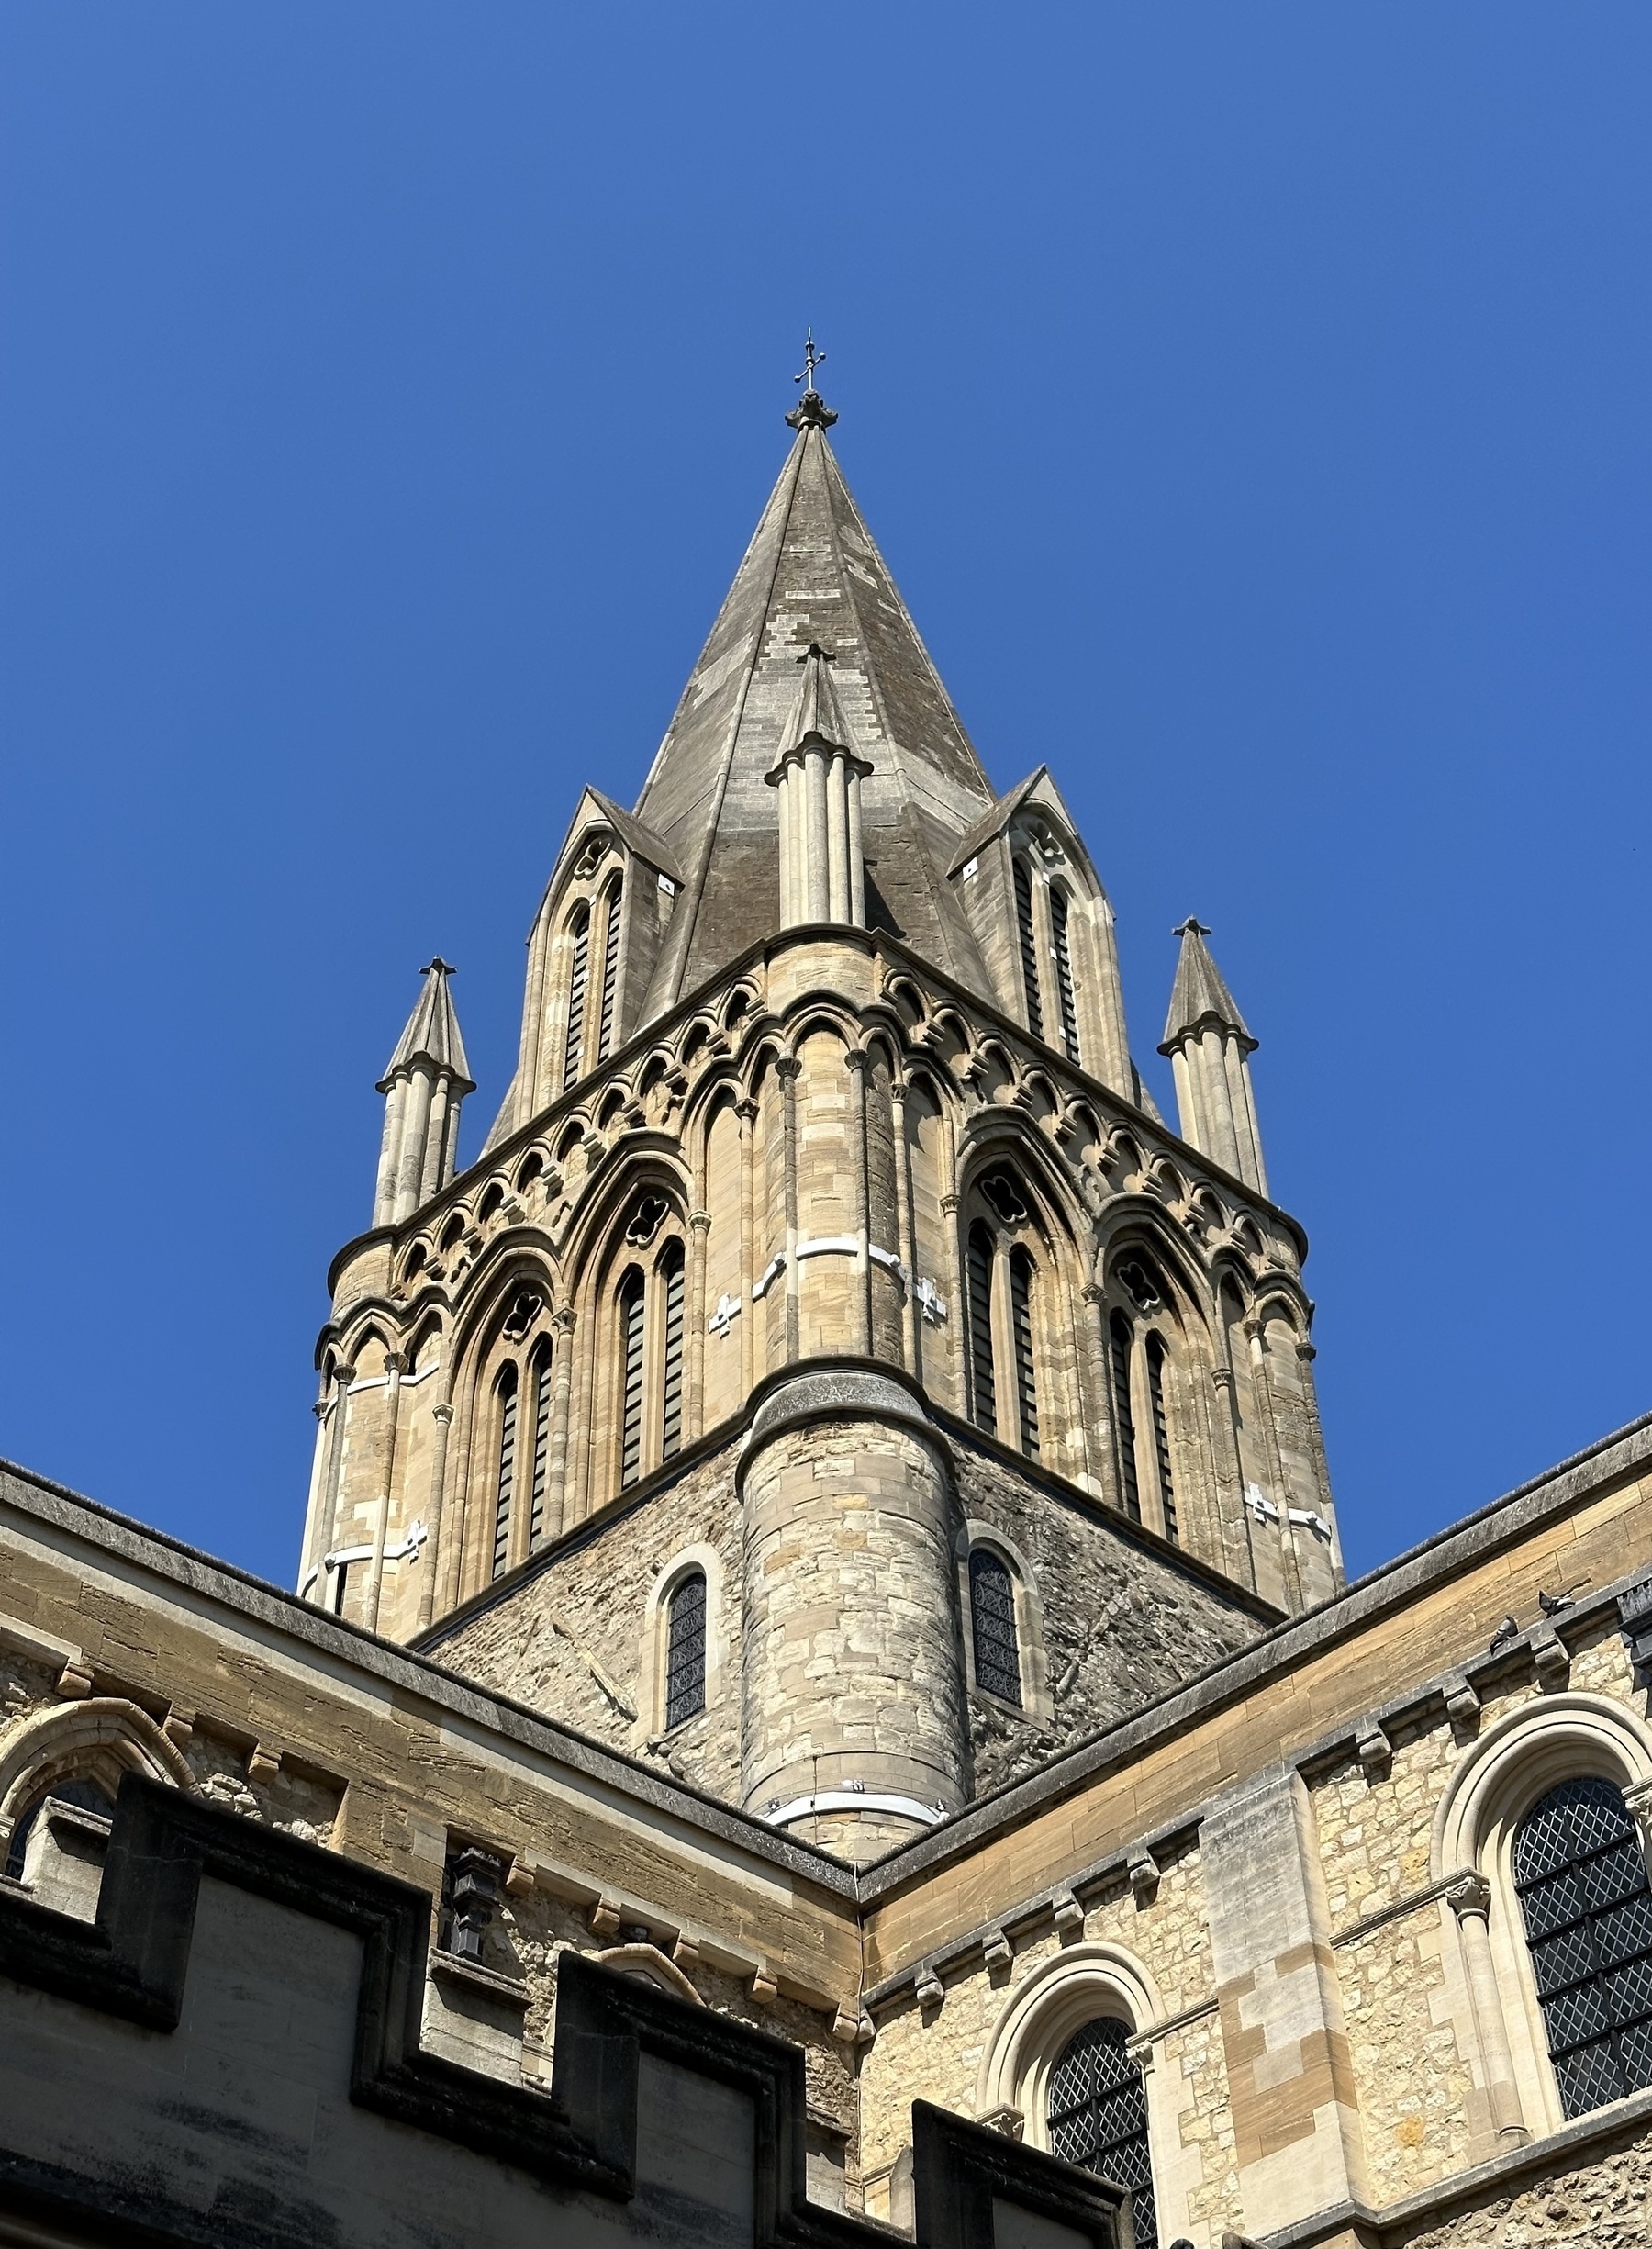 The central stone tower of Christ Church cathedral in Oxford.